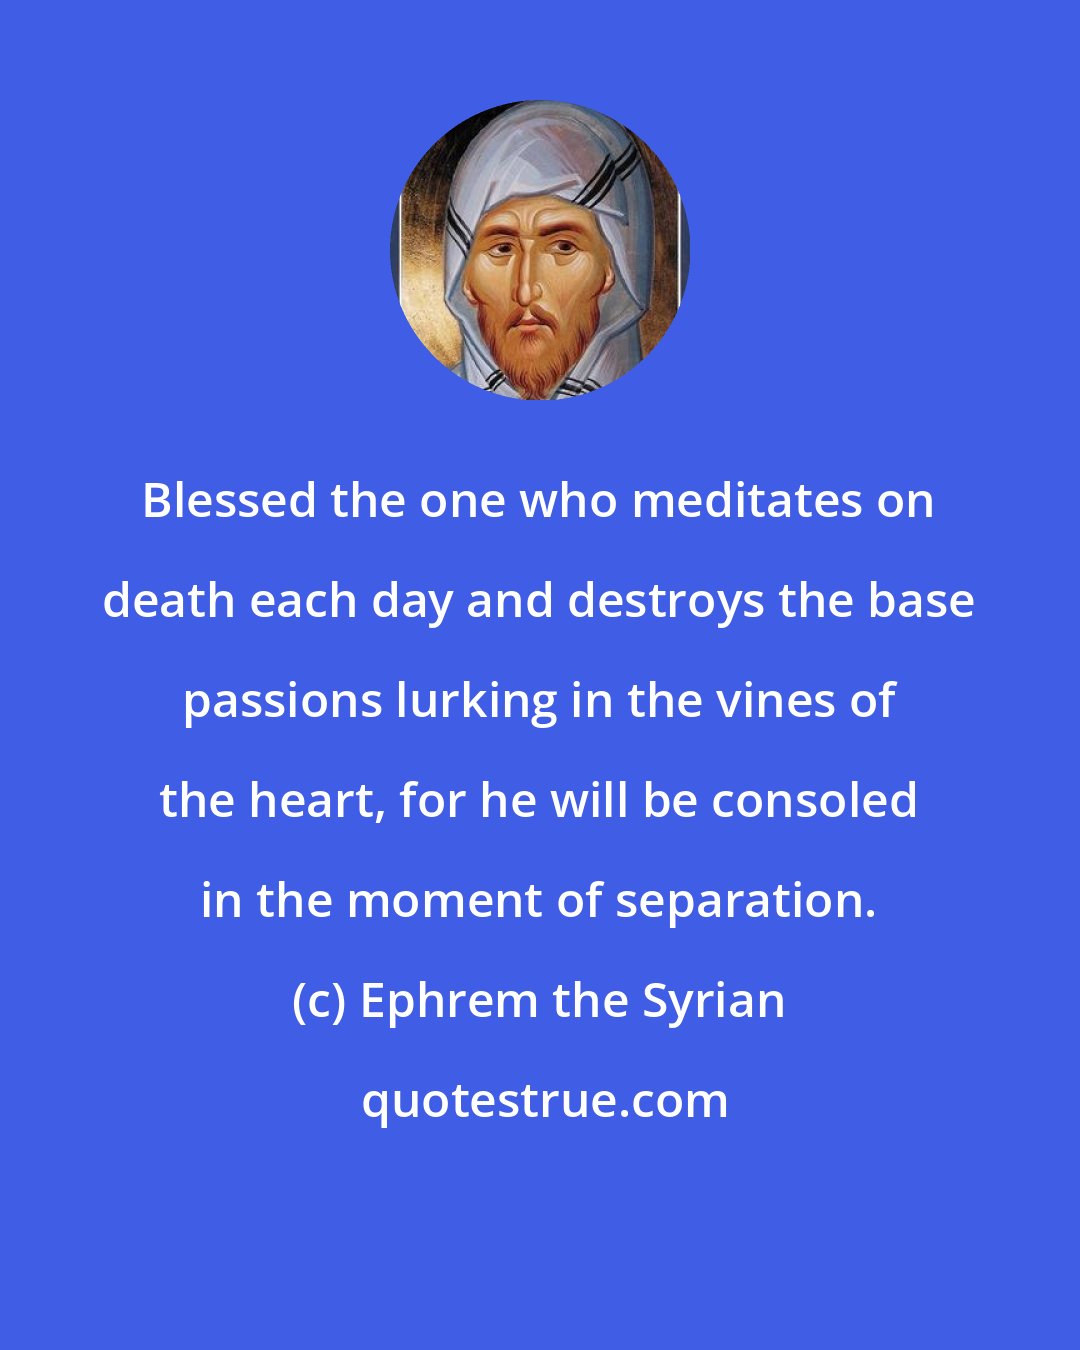 Ephrem the Syrian: Blessed the one who meditates on death each day and destroys the base passions lurking in the vines of the heart, for he will be consoled in the moment of separation.